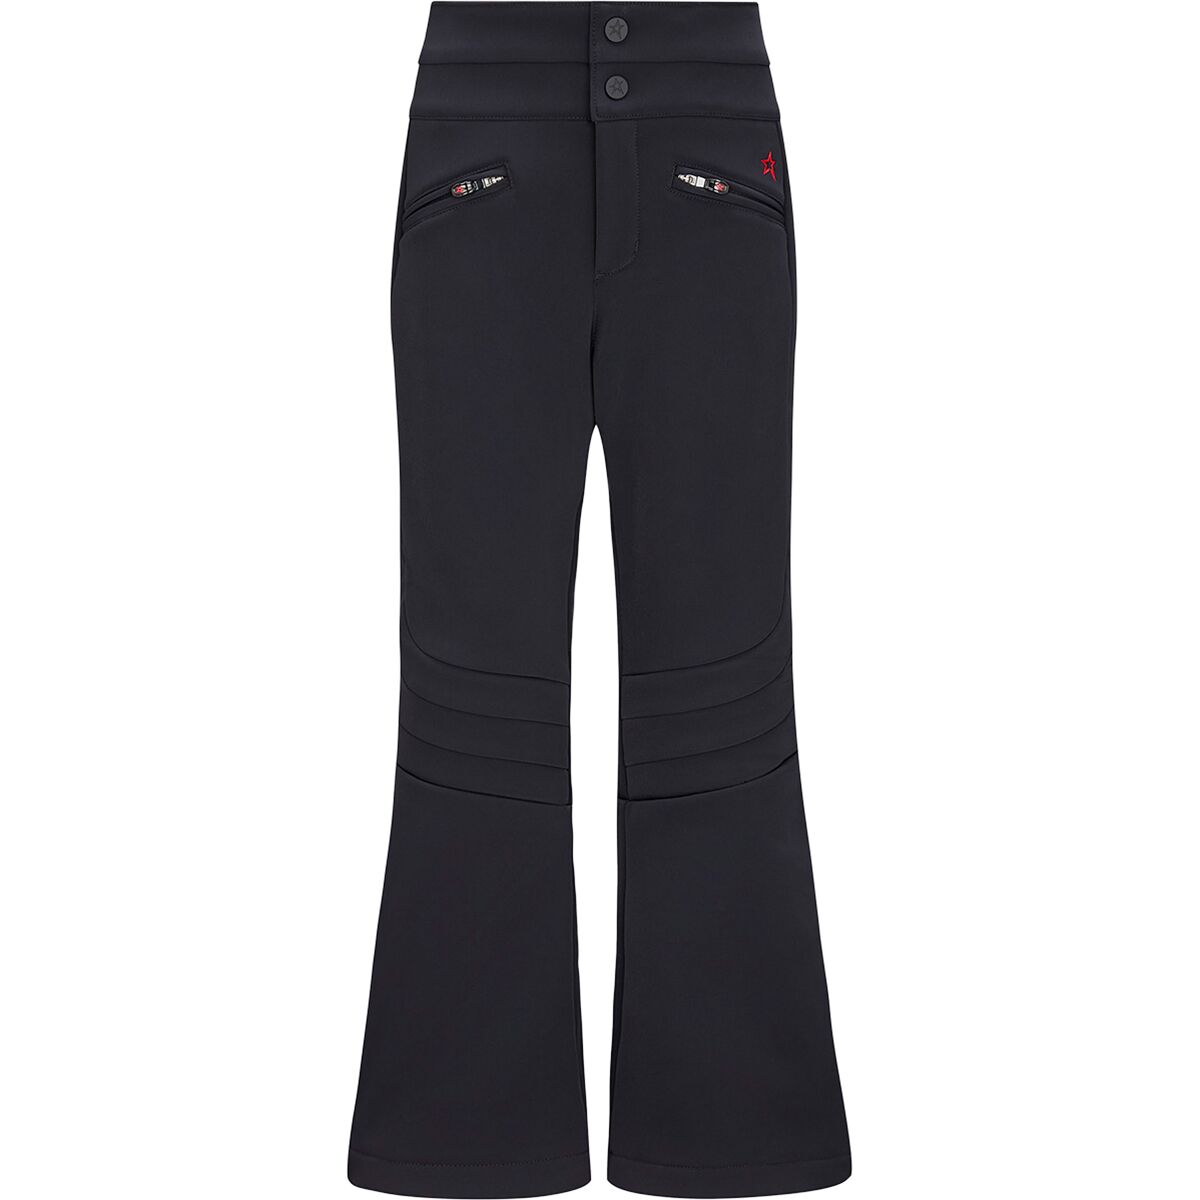 Luxara™ Flare Pant